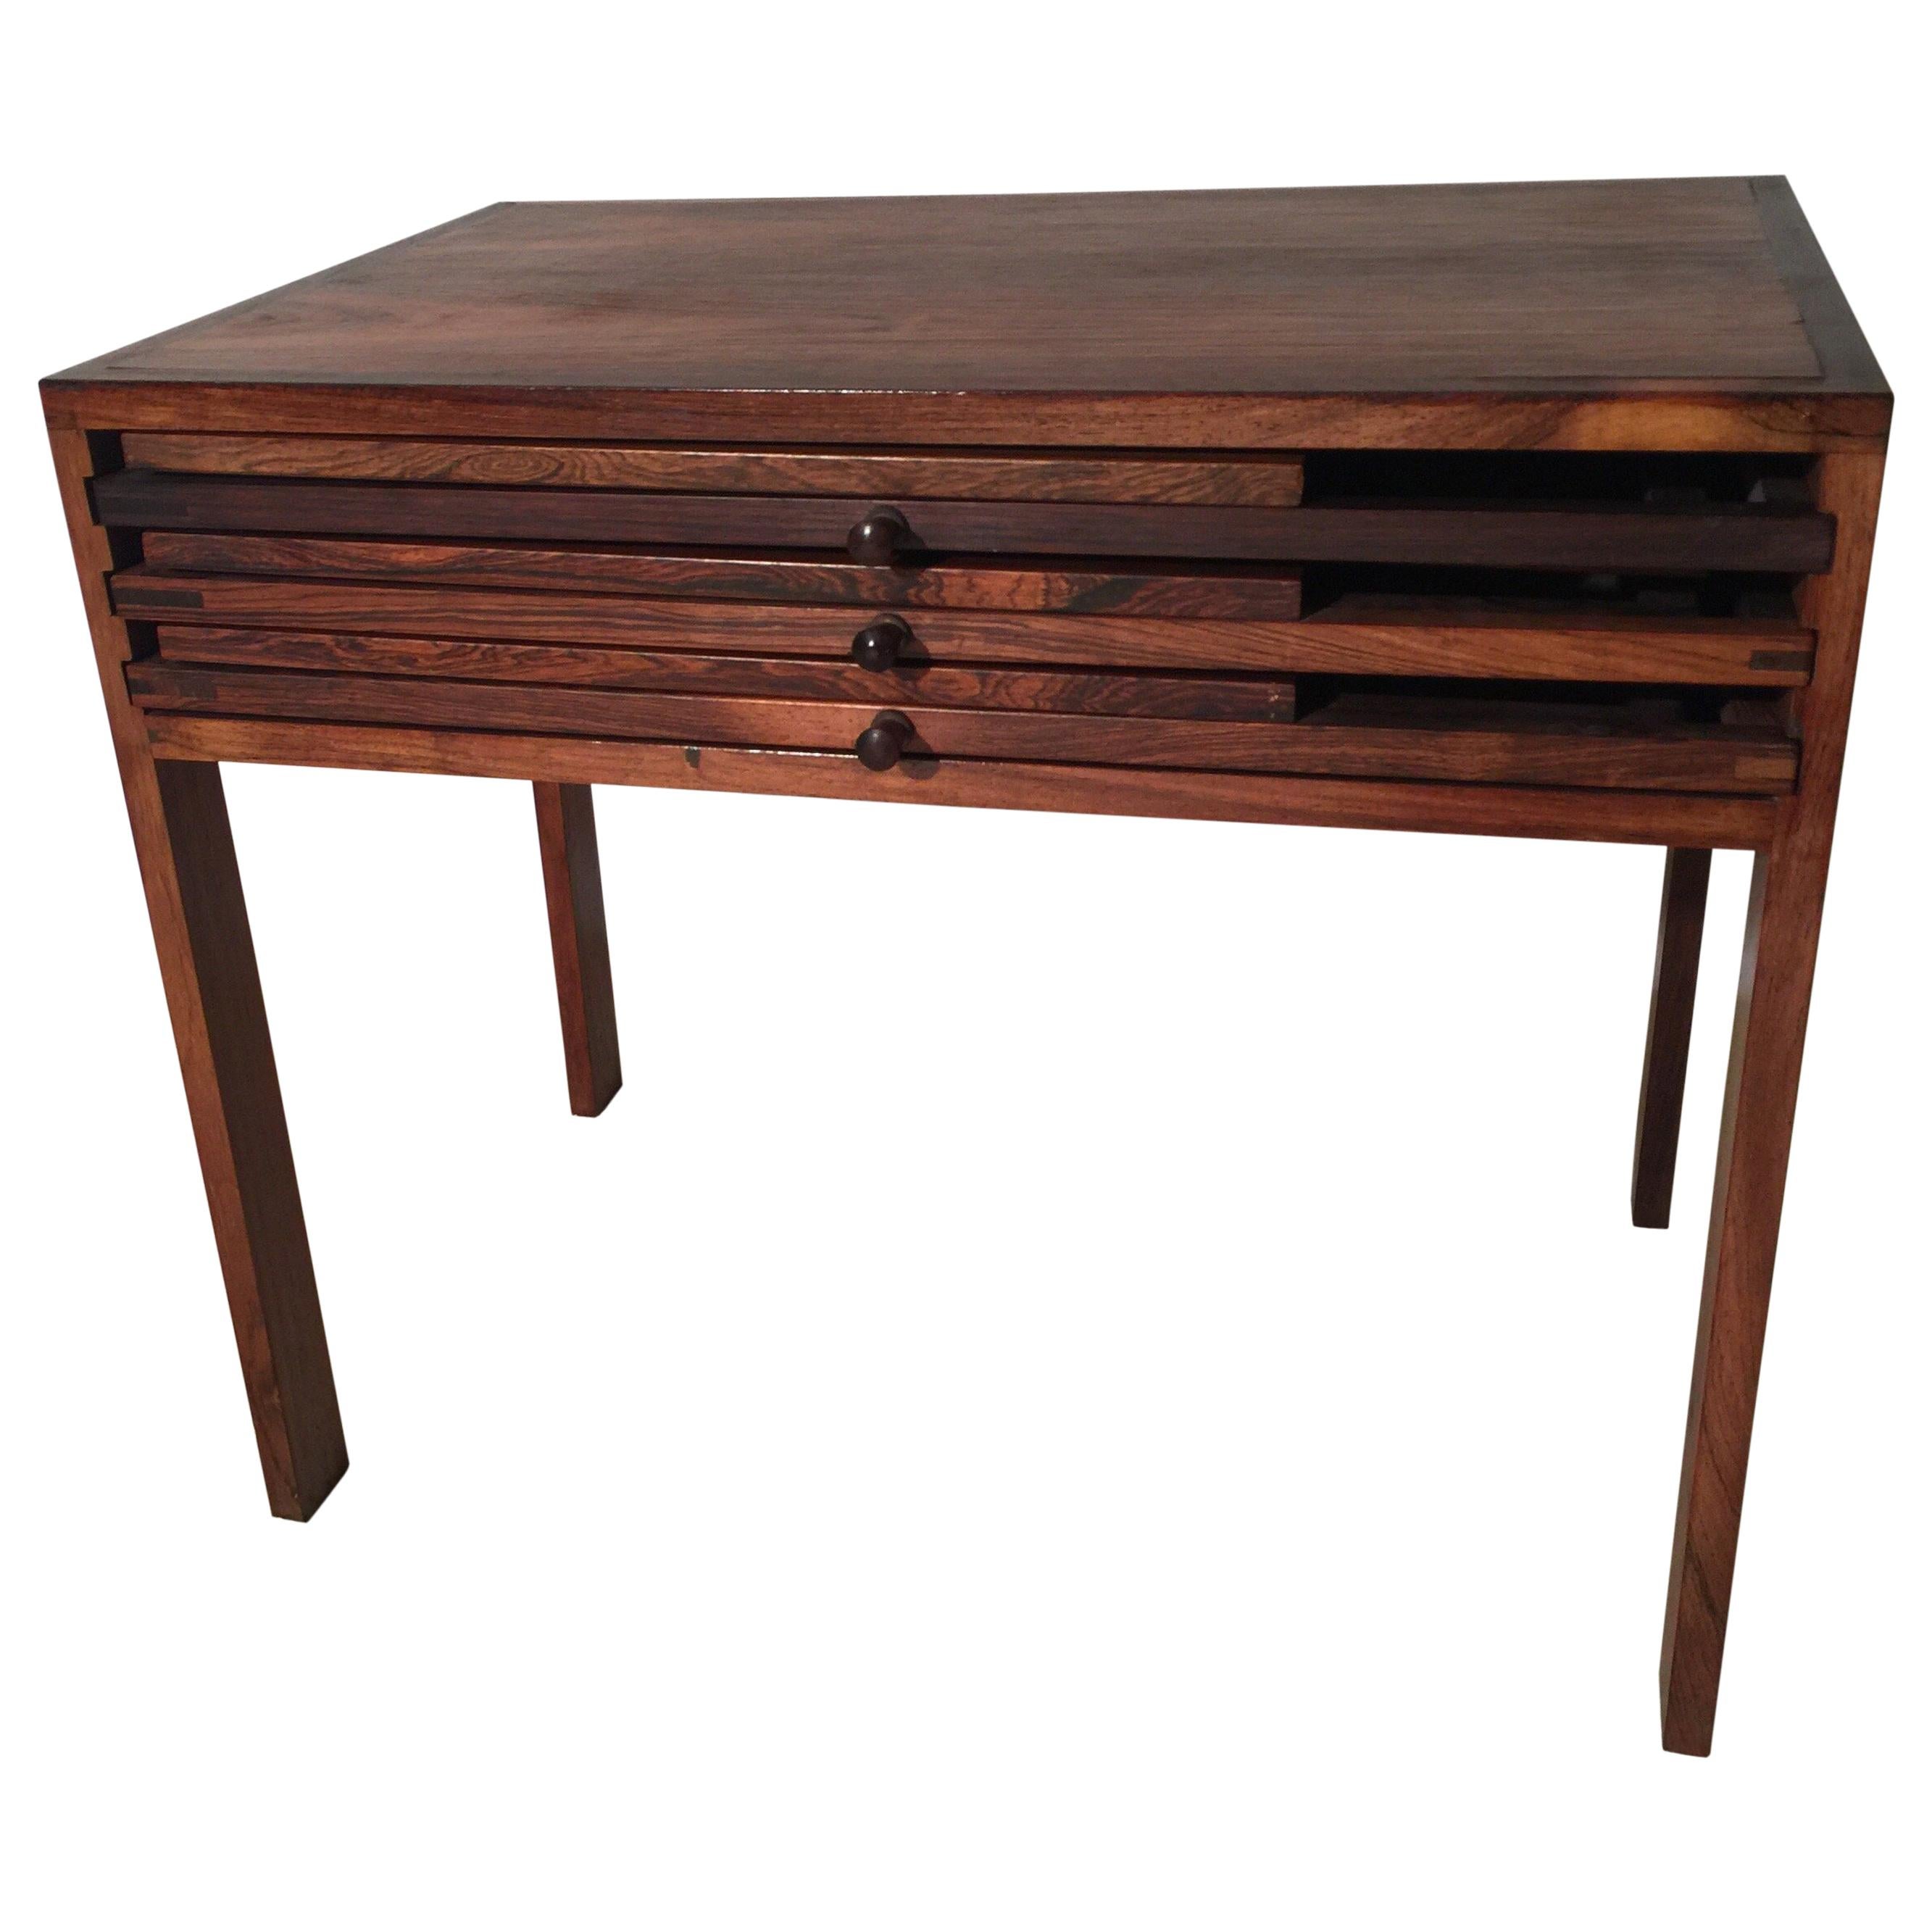 Set of Three Rosewood Folding Tables Stored in End Table by Illum Wikkelsø